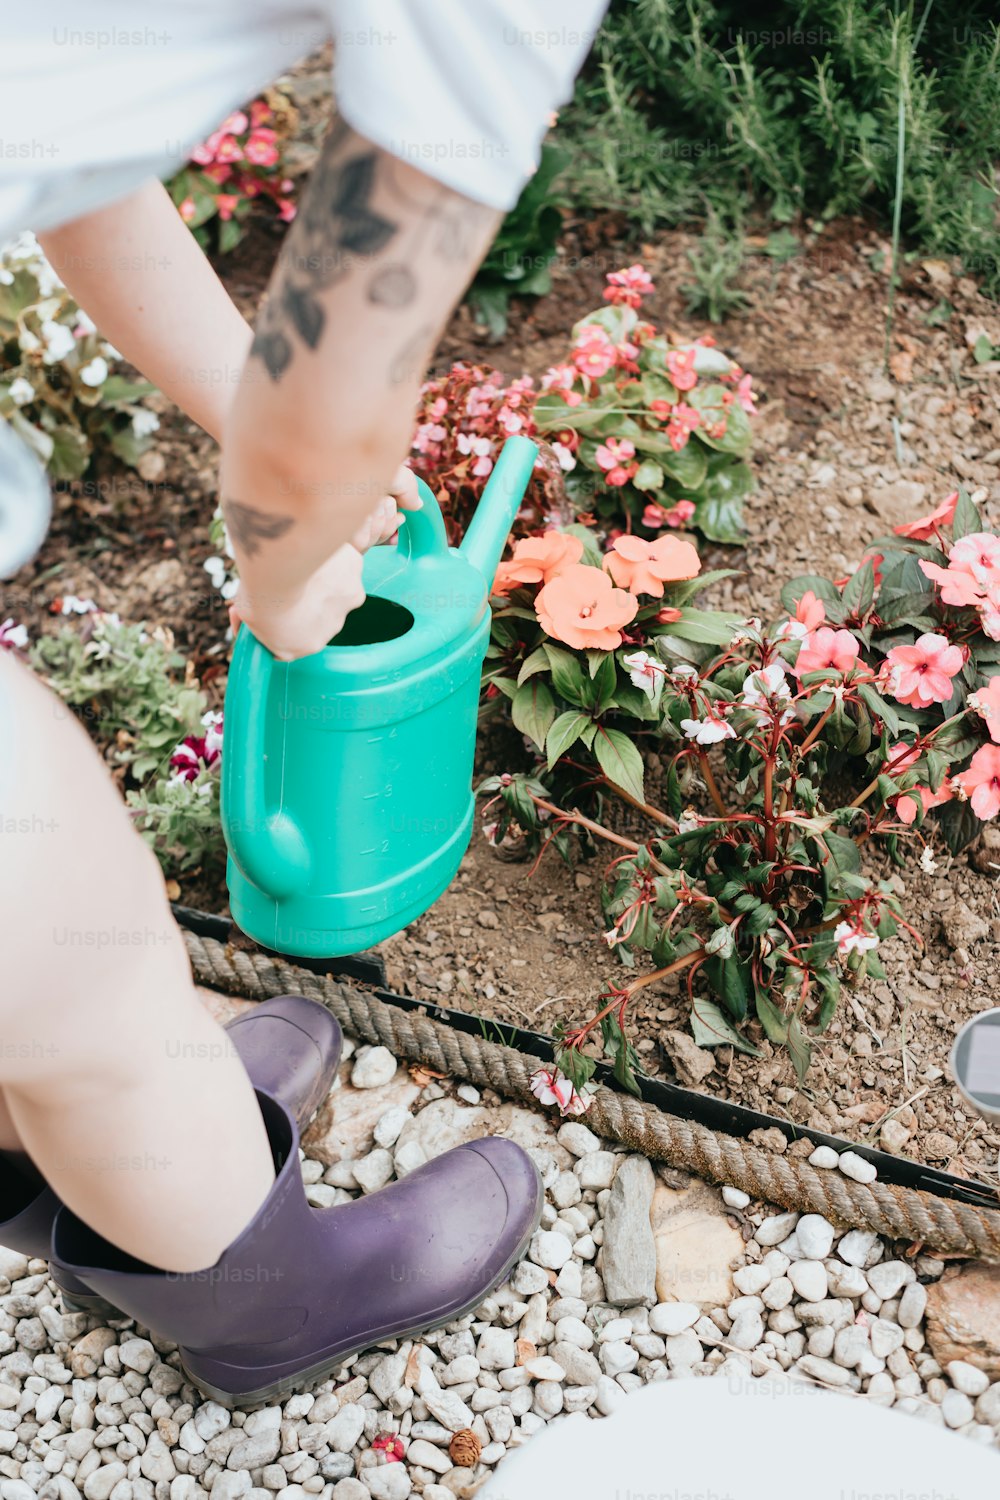 a person wearing purple shoes and a green watering can